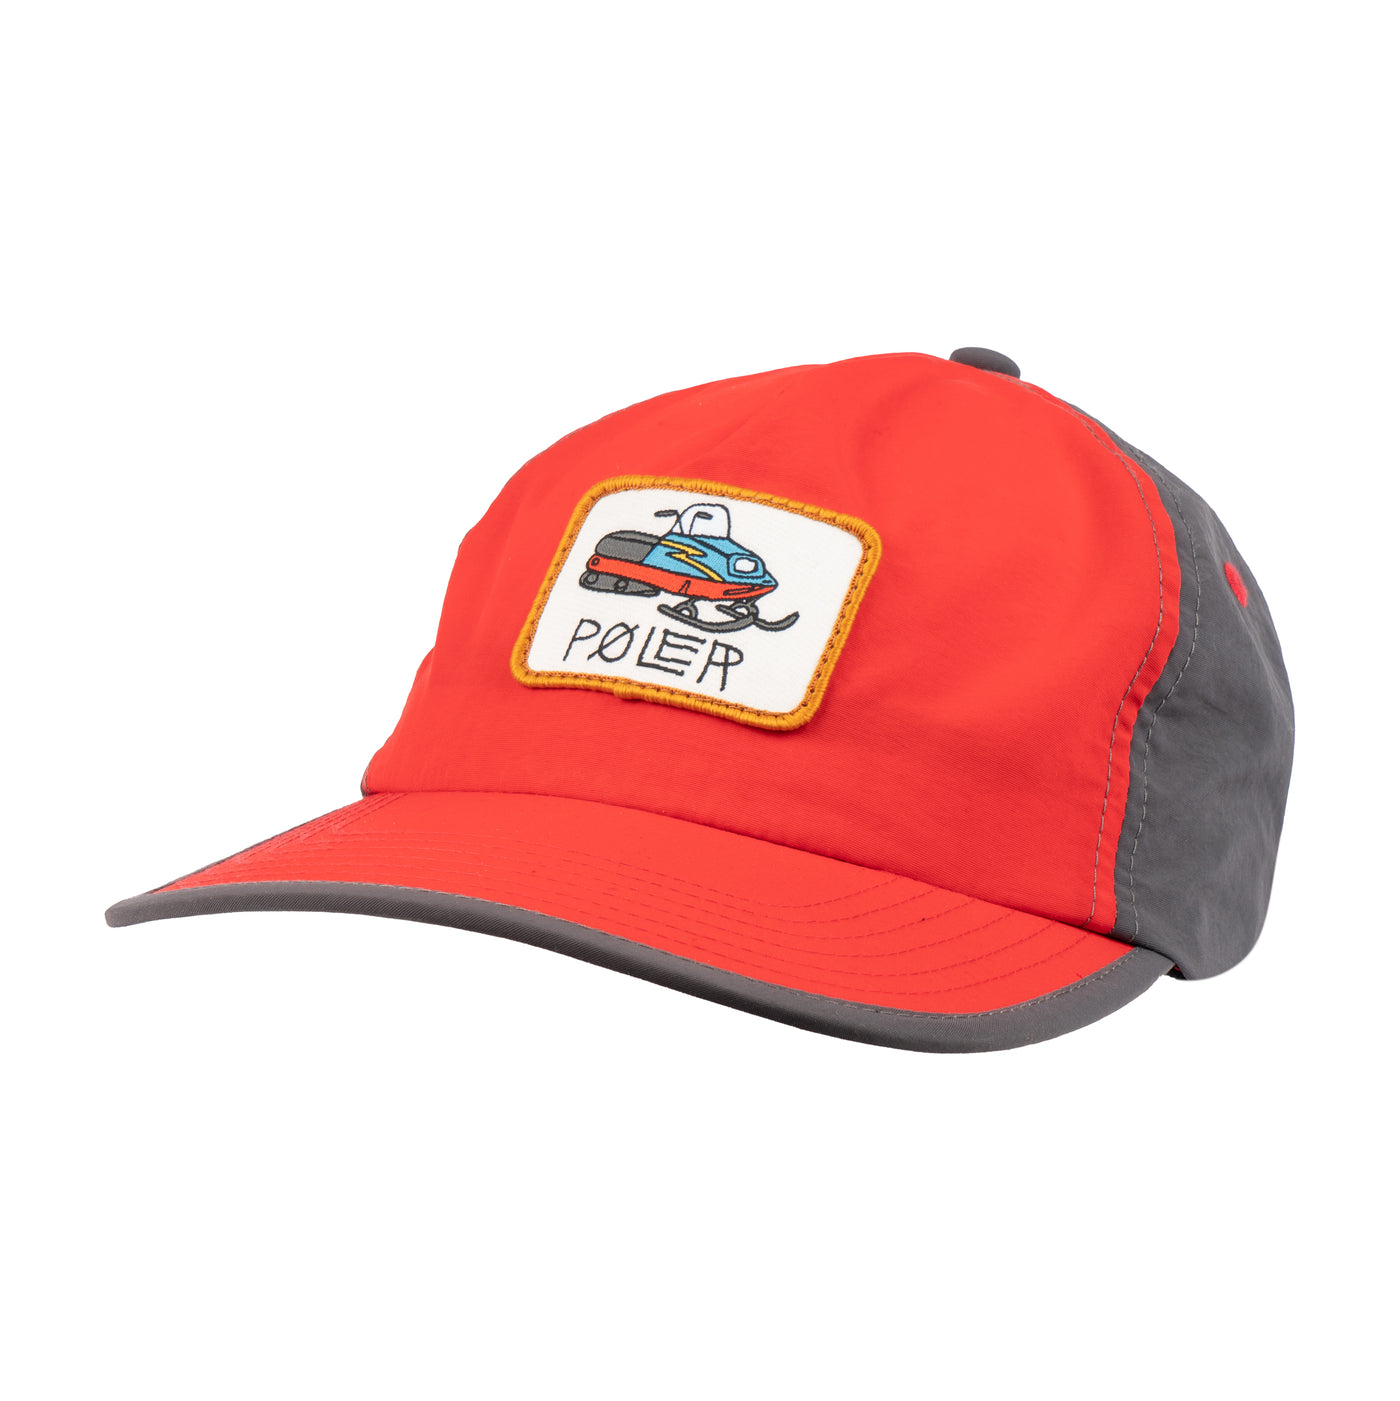 Wellsy Hat product RED O/S 